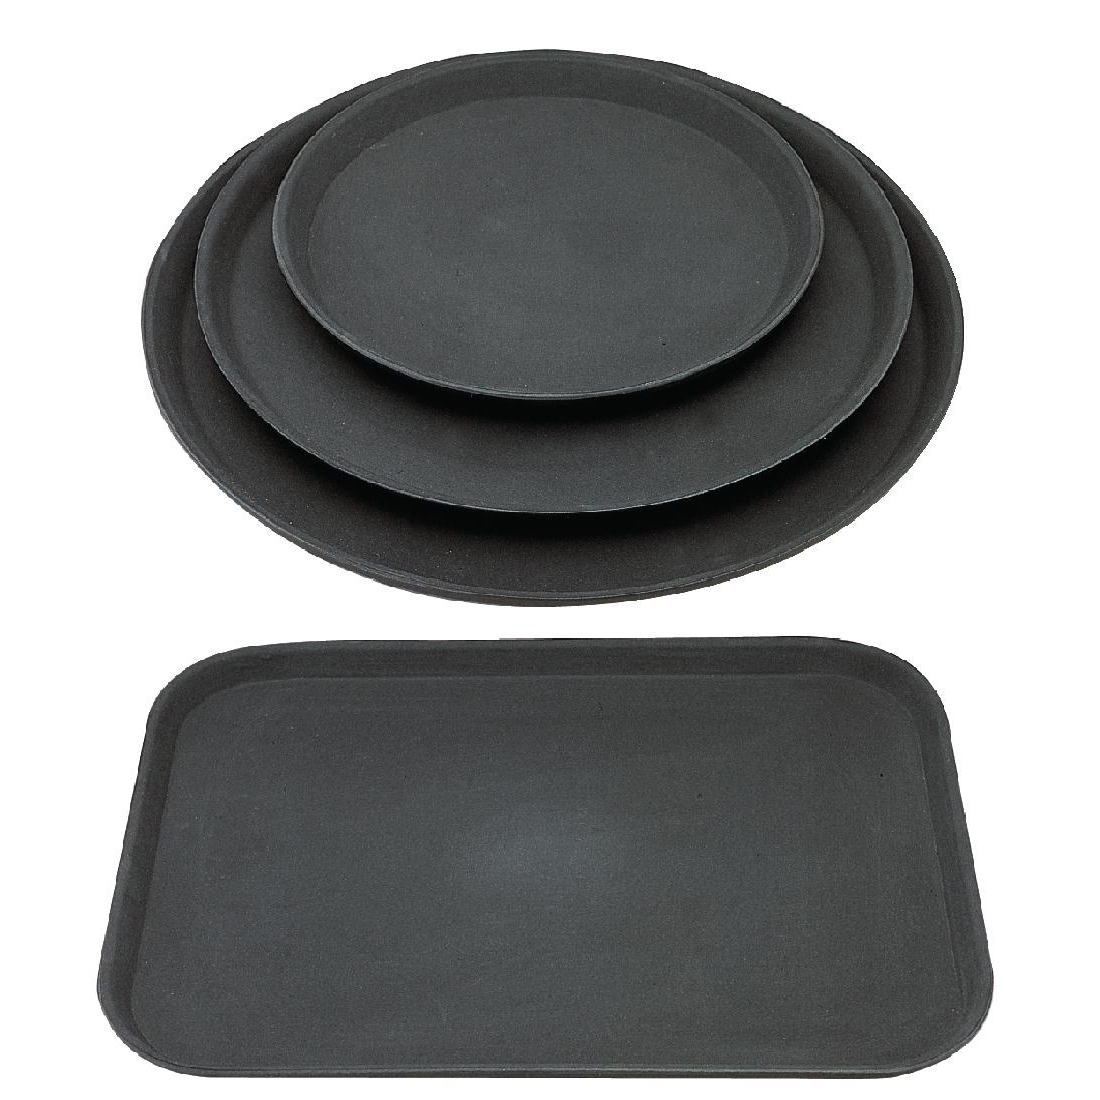 Special Offer Set of 12 Non-Slip Trays Combo